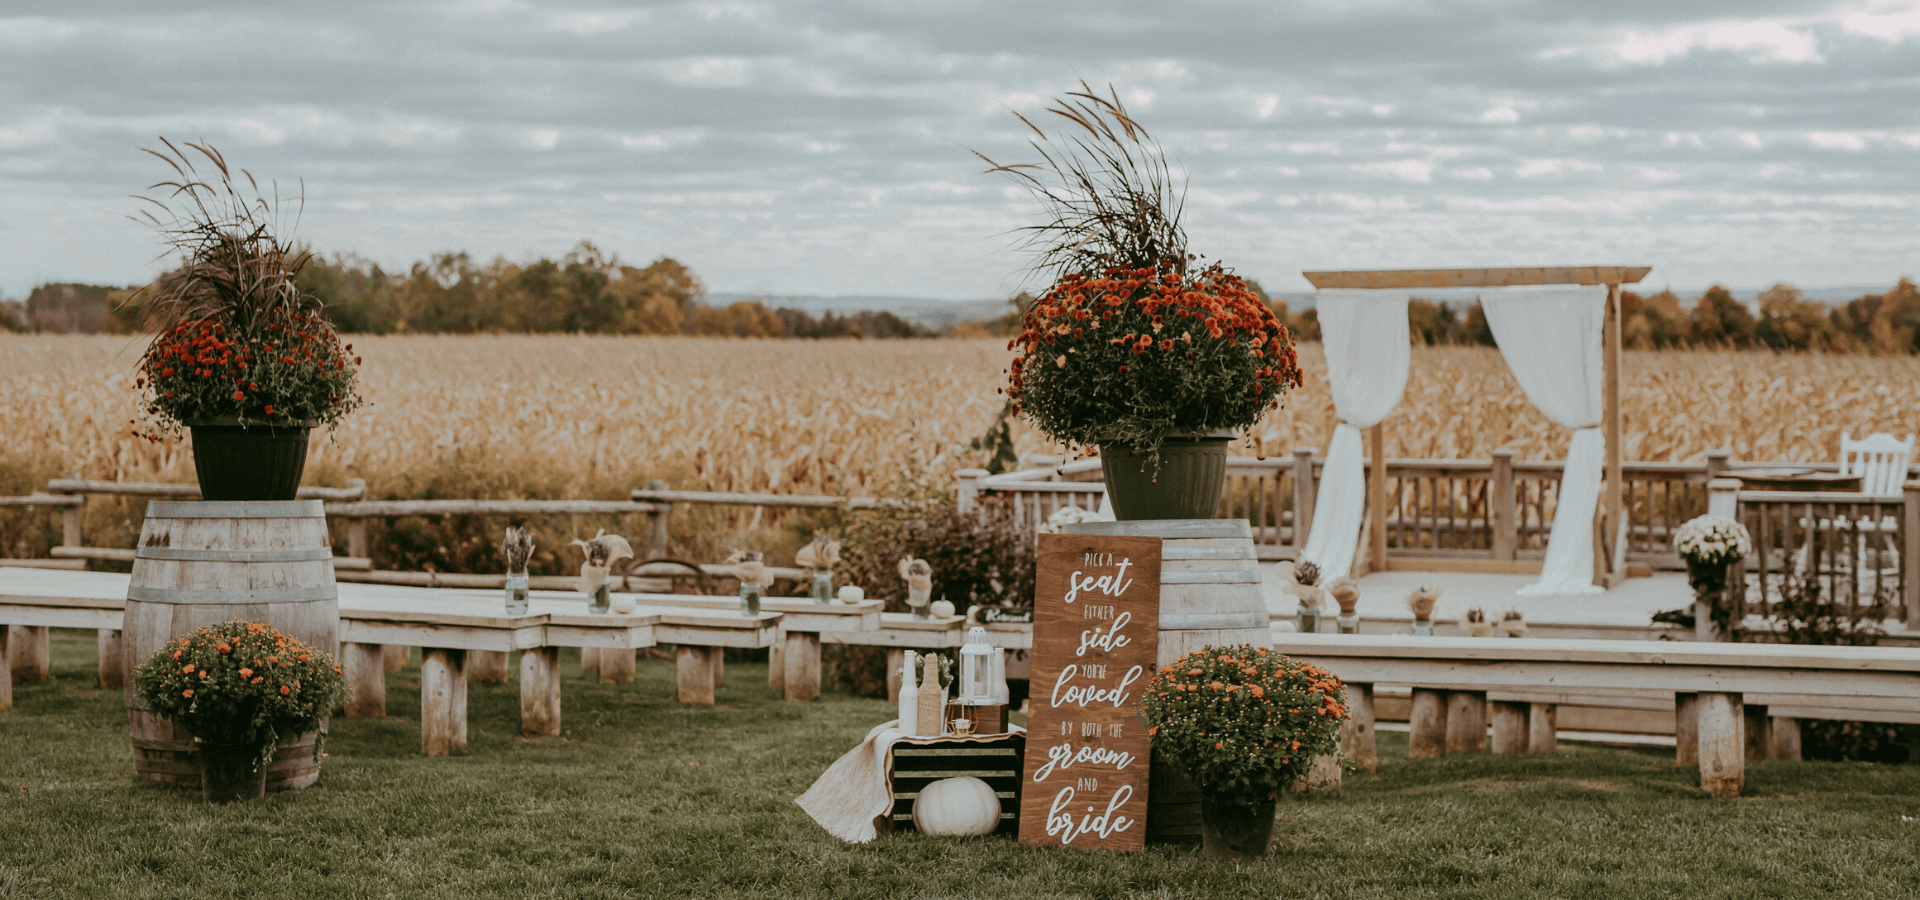 Hero image for Danielle and Keith’s Sweet Rustic Wedding At The Bradford Barn